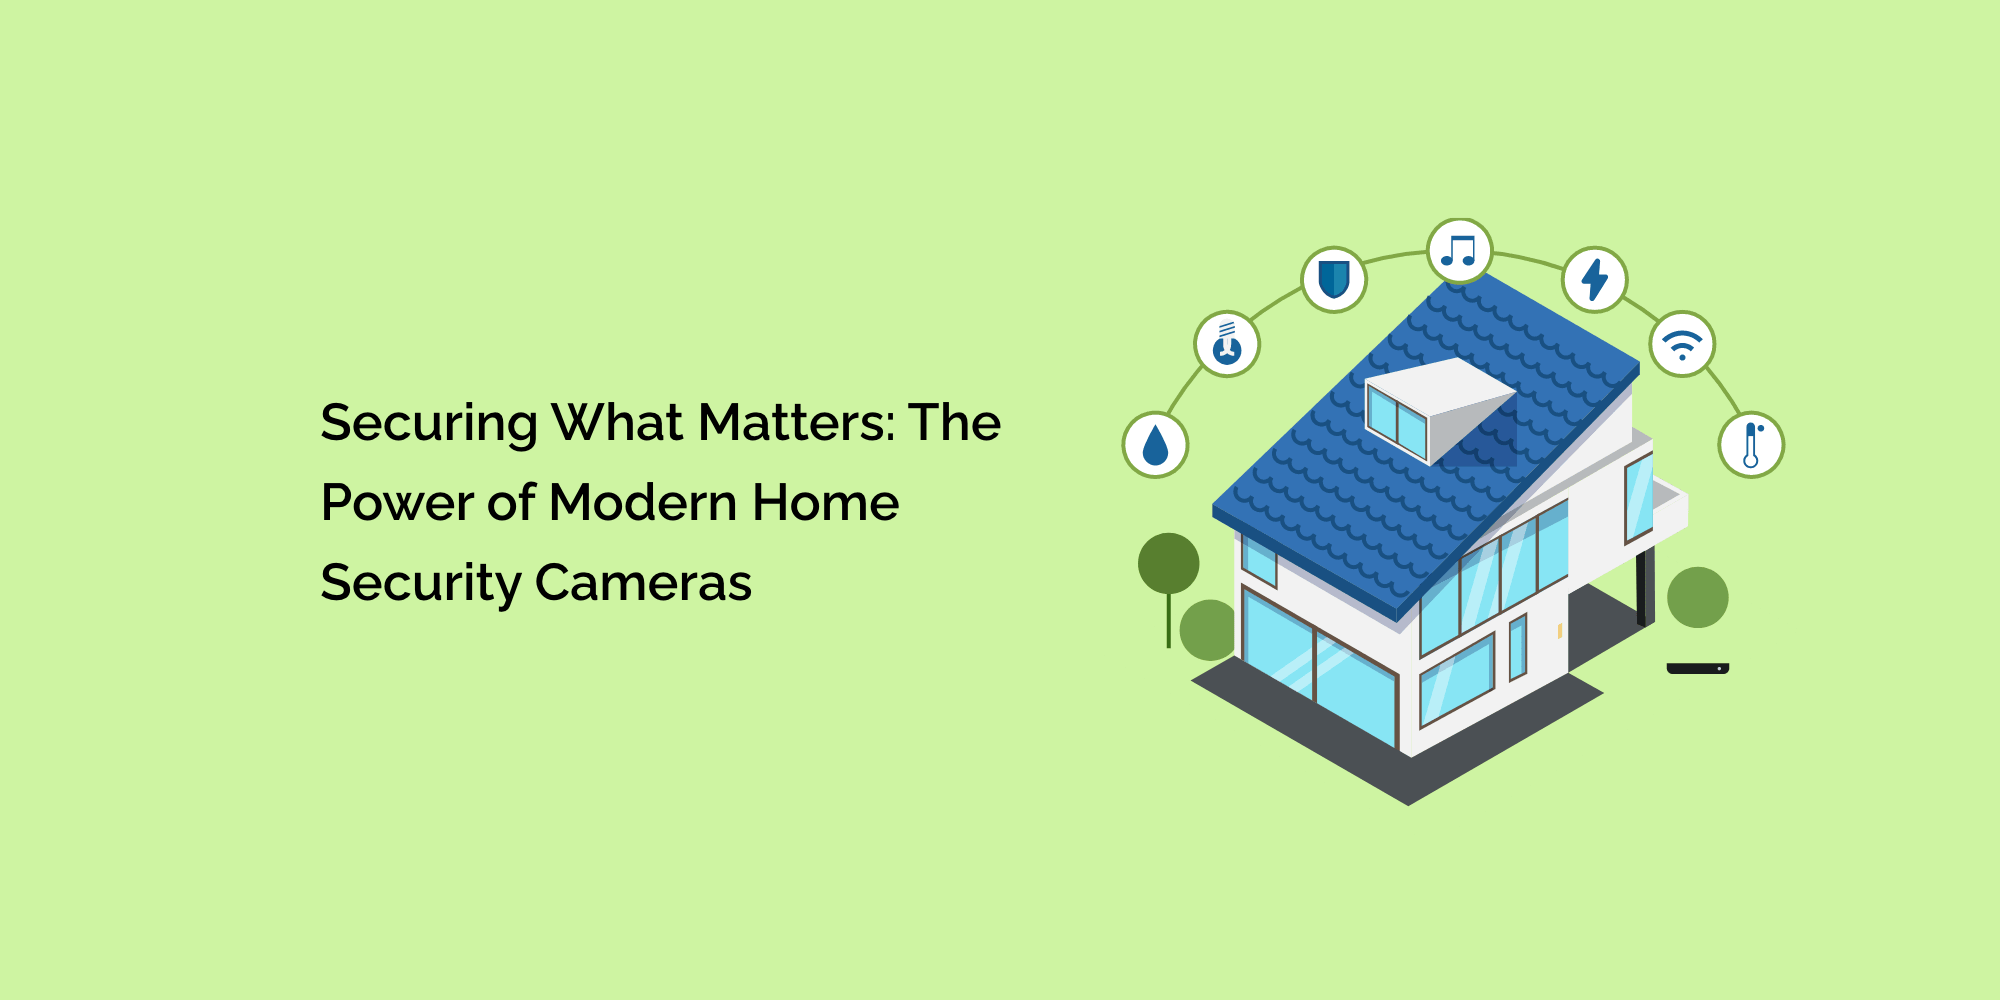 Securing What Matters: The Power of Modern Home Security Cameras